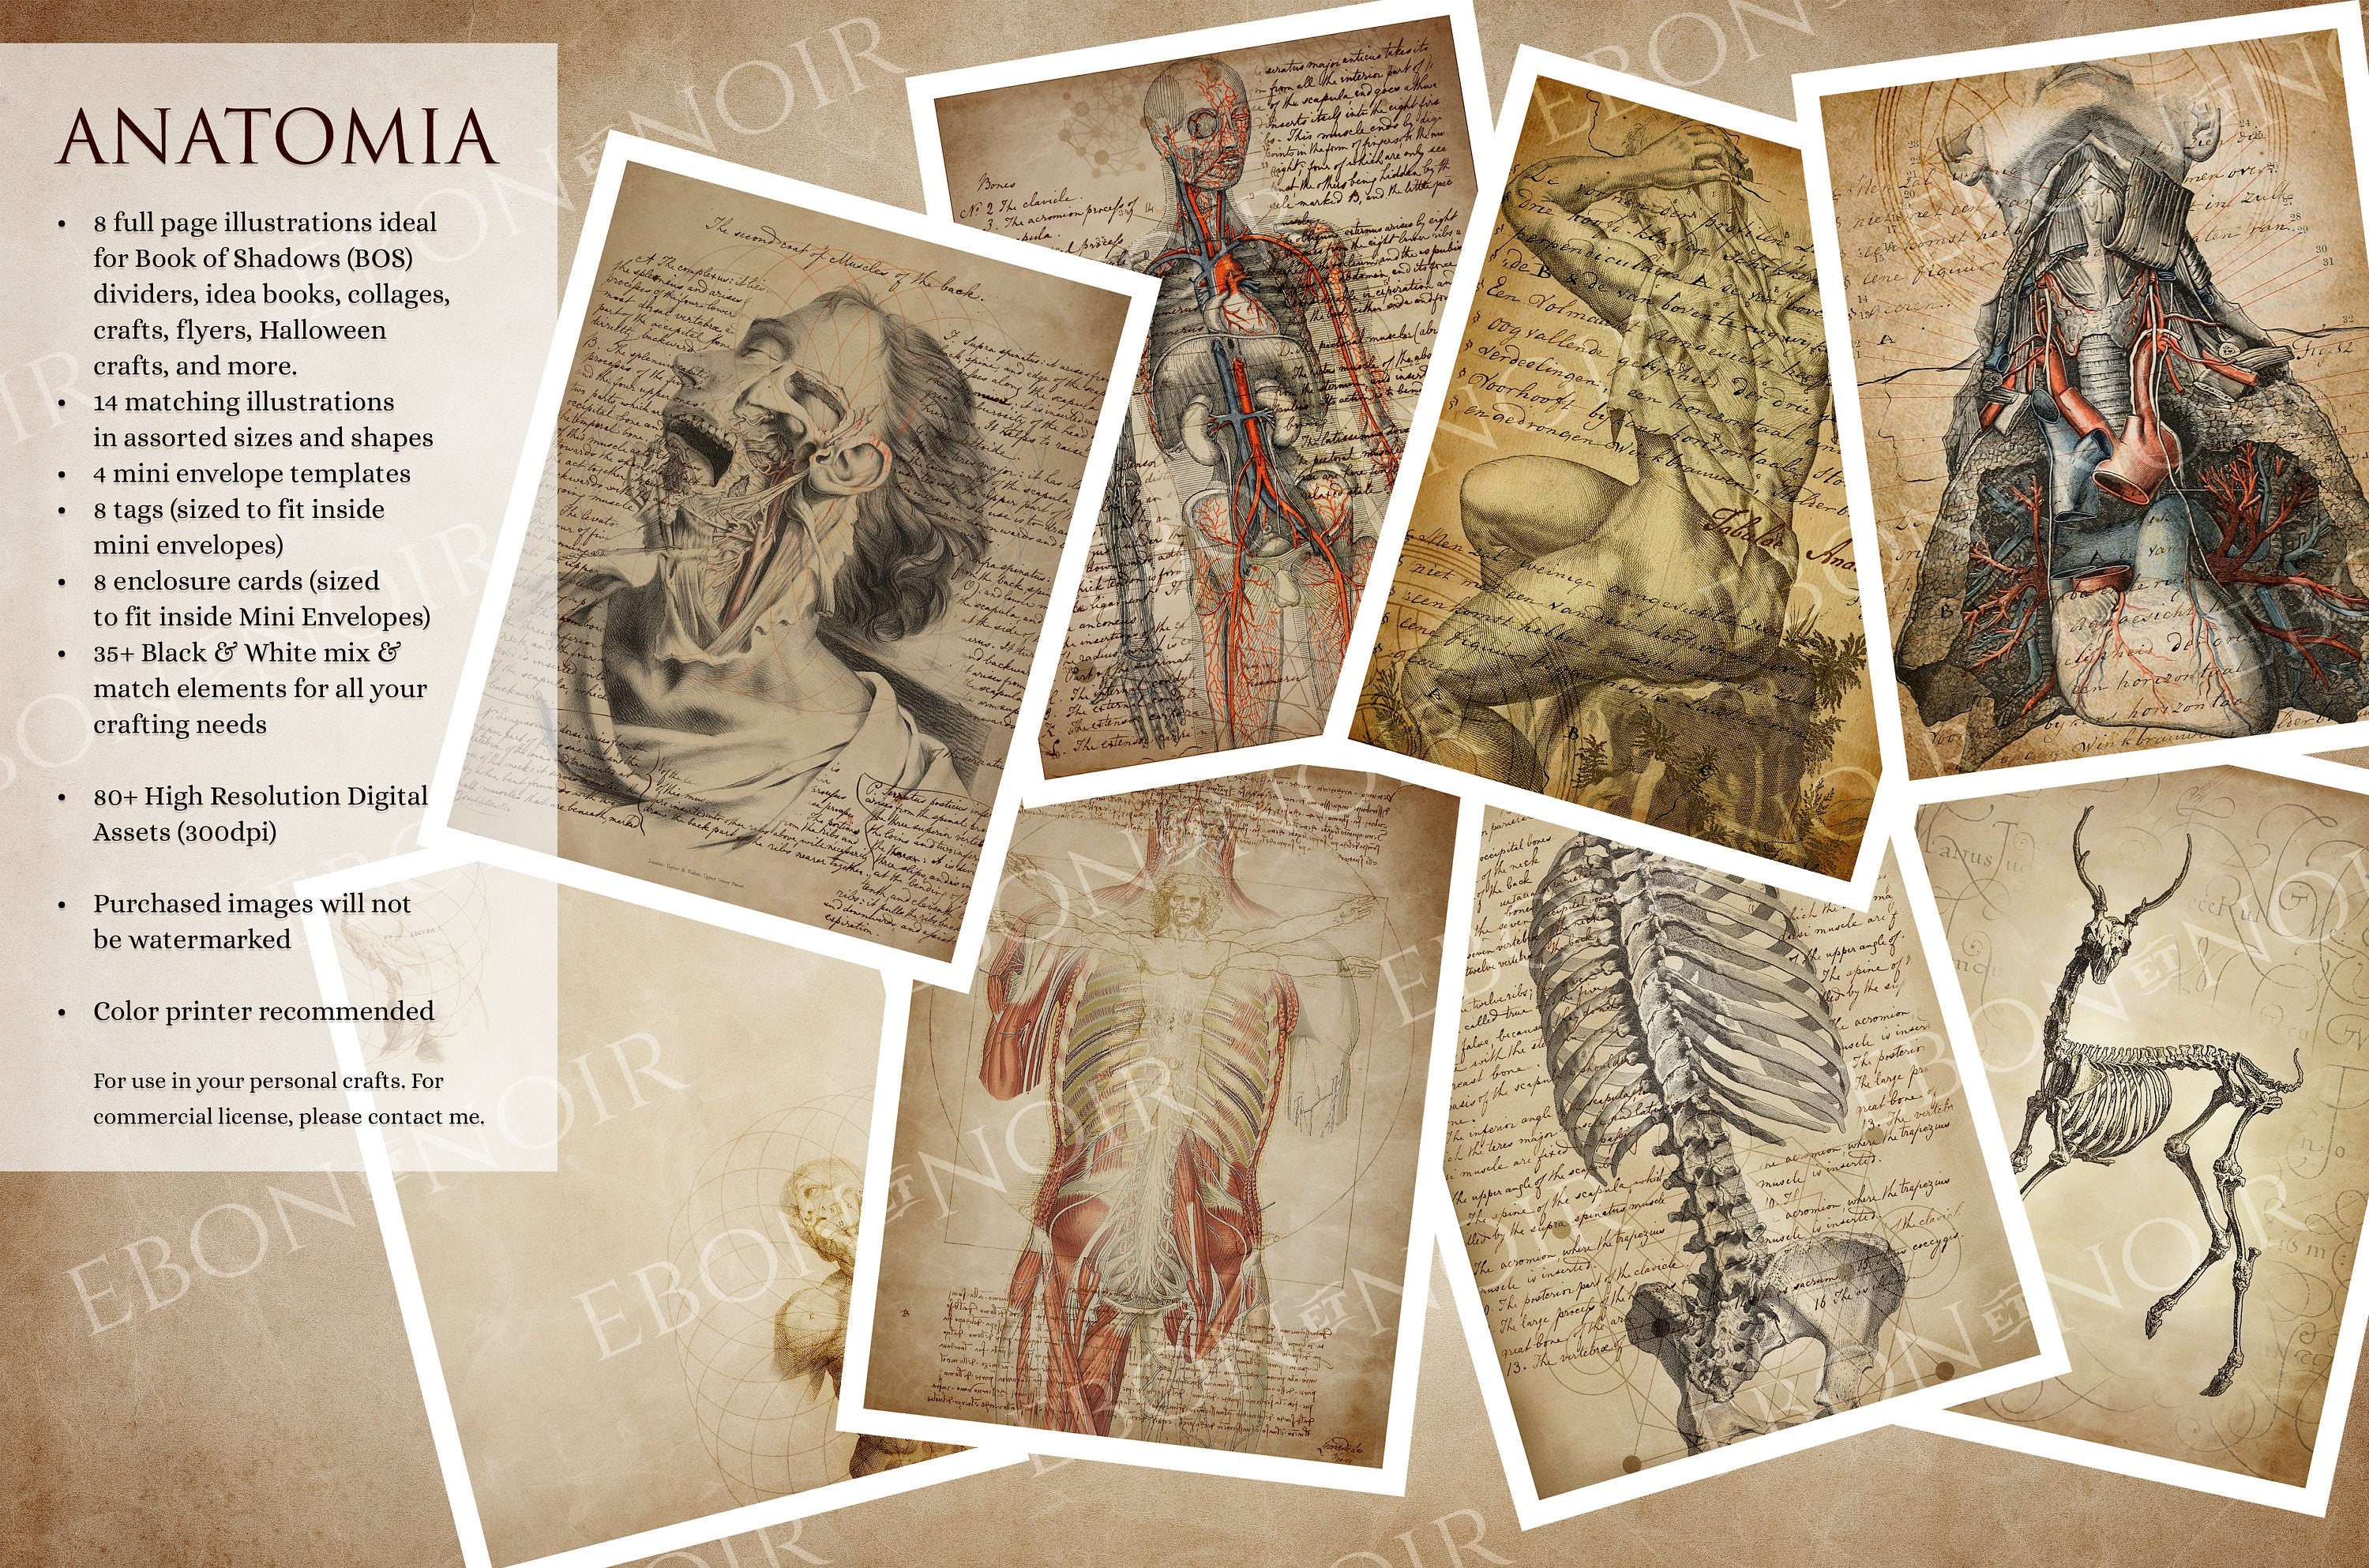 ANATOMIA, Anatomical Crafting Kit Based on Ancient Medical Texts, Book of Shadows (BOS), Scrapbook, Collage, Junk Journal, Digital Download